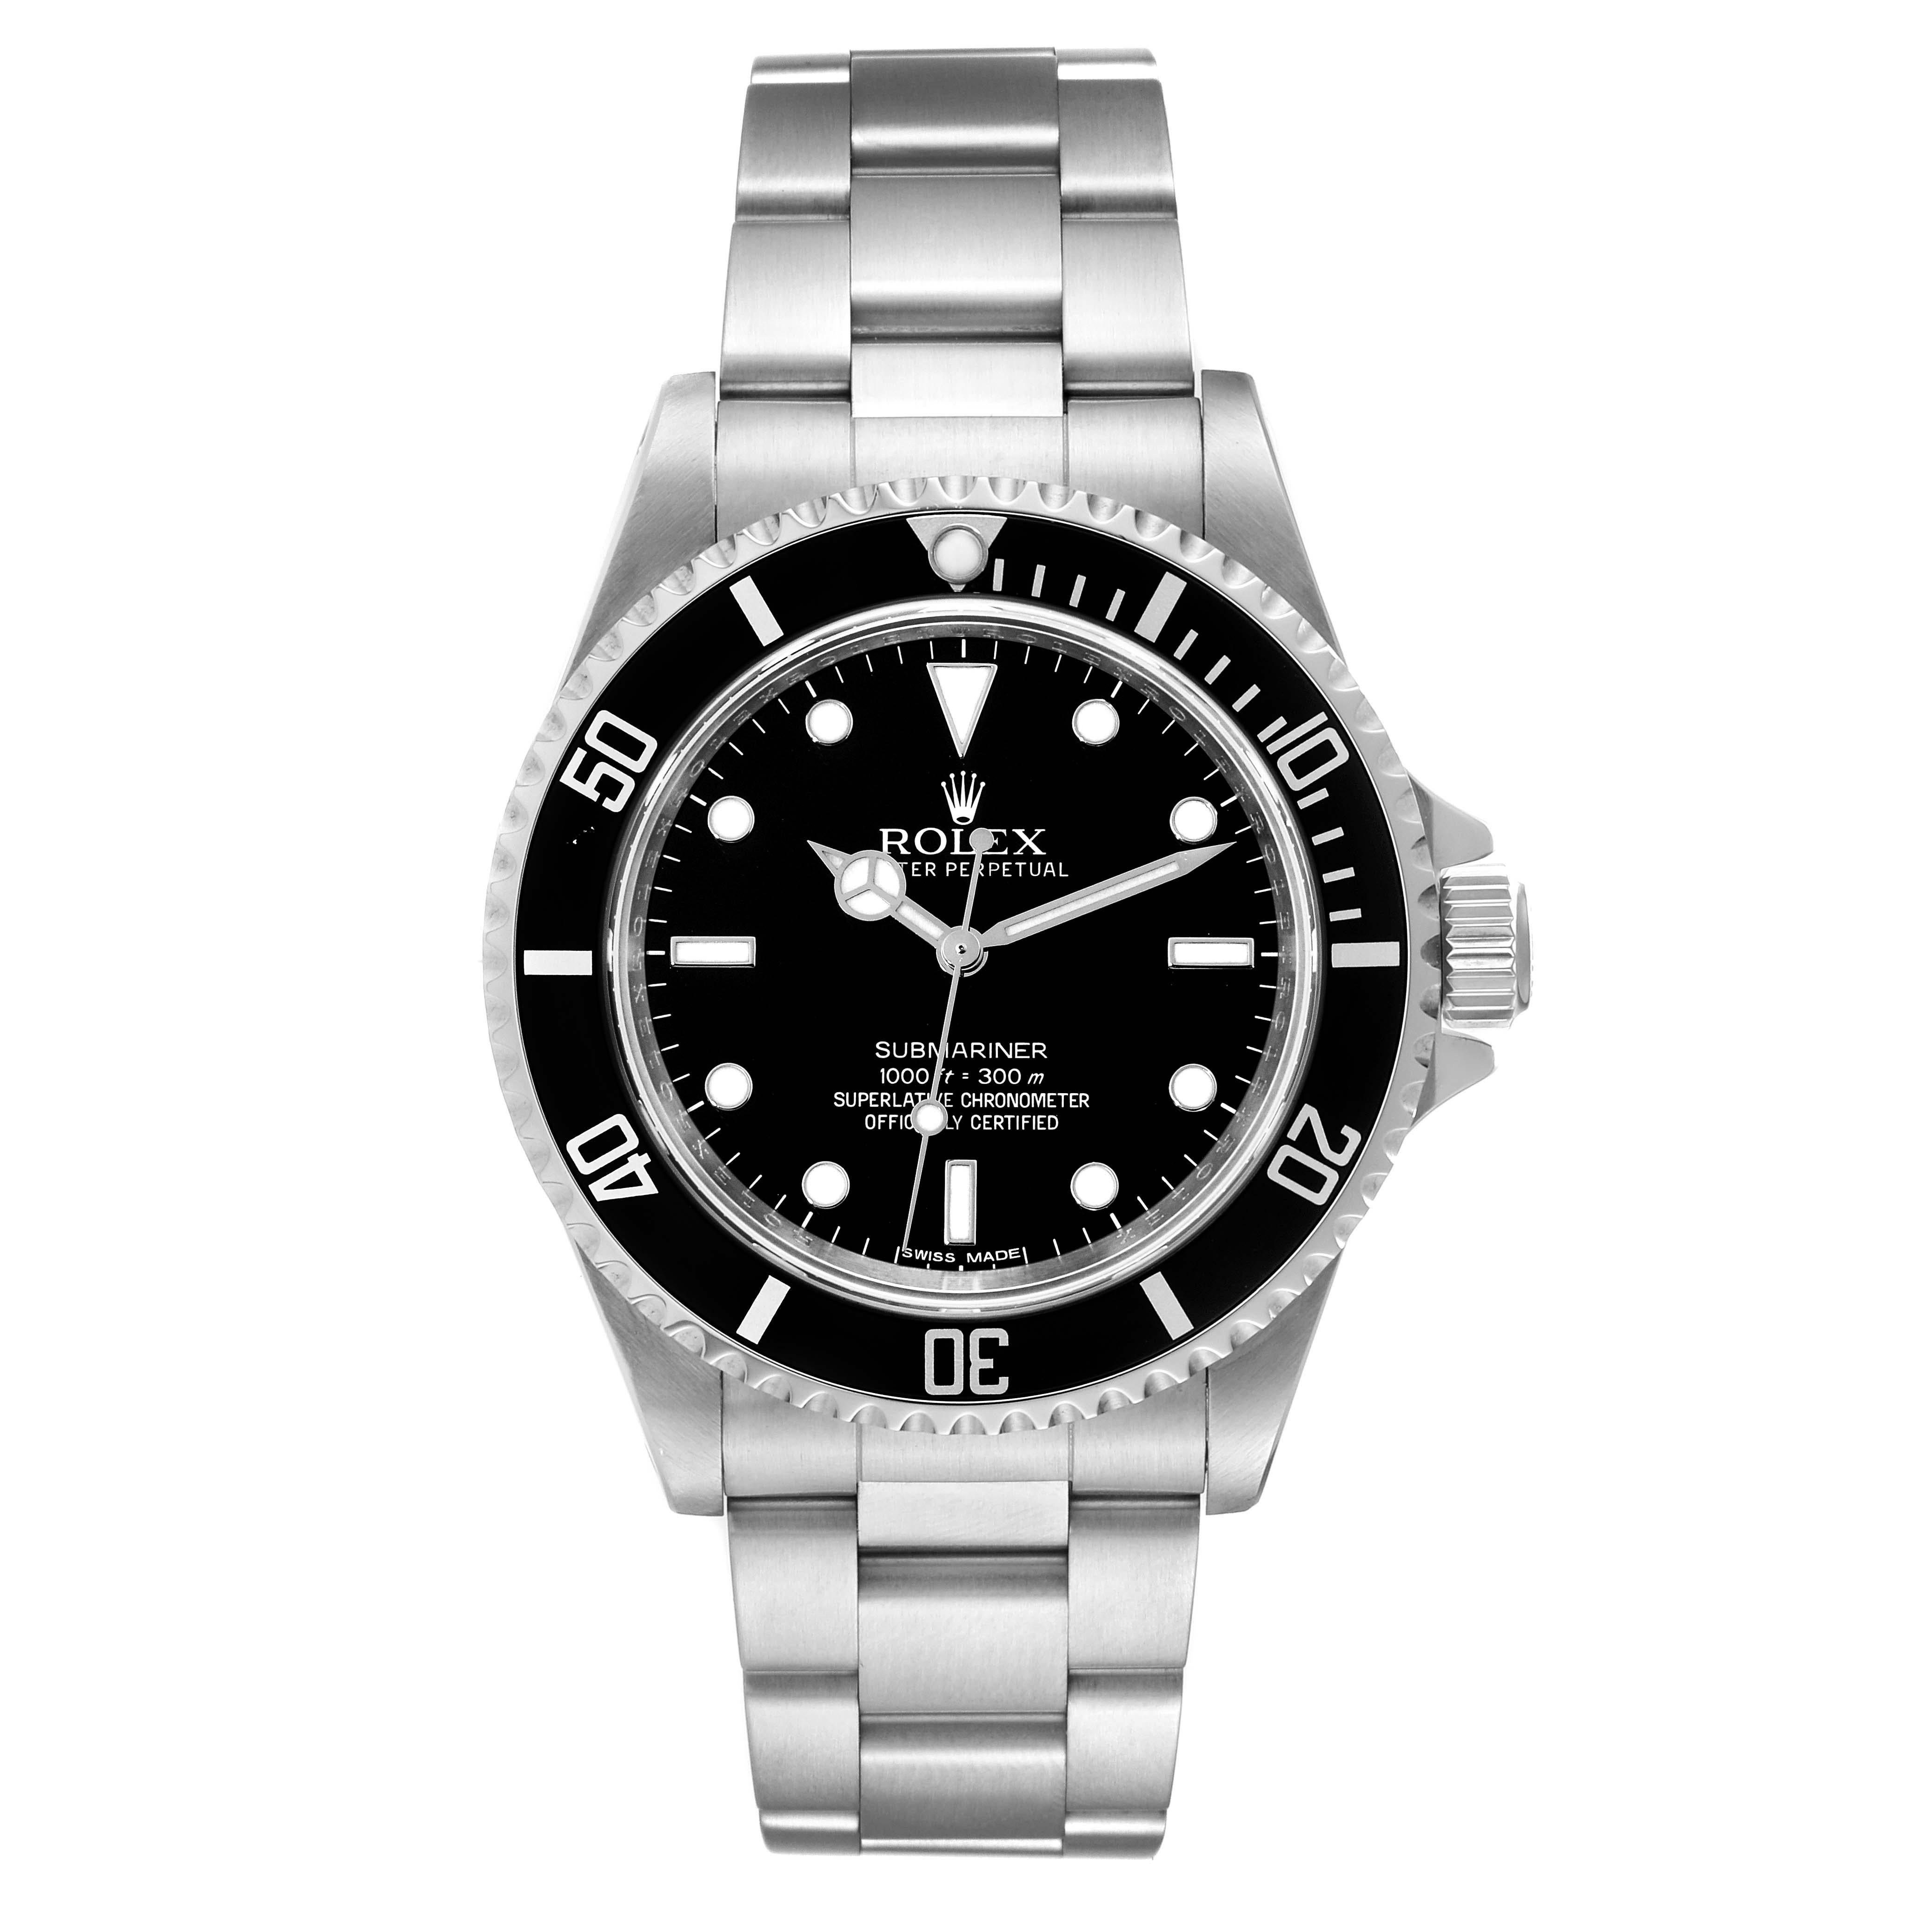 Rolex Submariner No Date 40mm 4 Liner Steel Mens Watch 14060 Box Card. Officially certified chronometer automatic self-winding movement. Stainless steel case 40.0 mm in diameter. Rolex logo on the crown. Special time-lapse unidirectional rotating